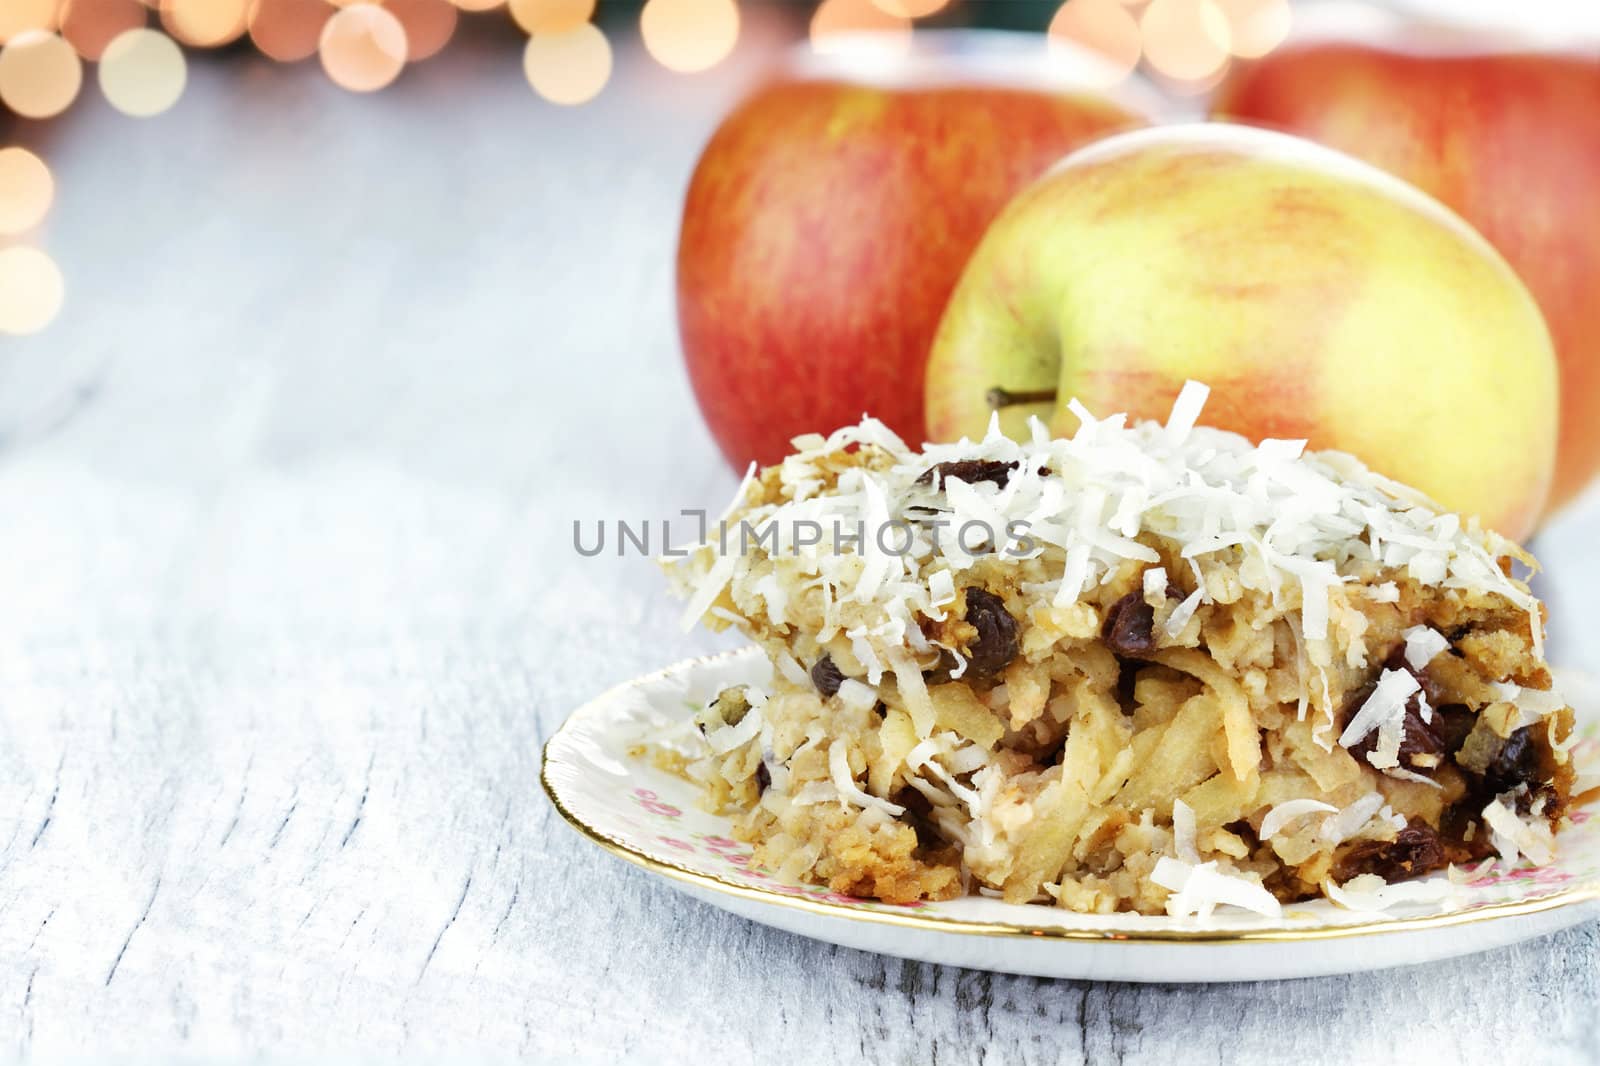 Apple casserole made of shredded apples, oats, coconut and raisins. Shallow depth of field with room for copy space. 